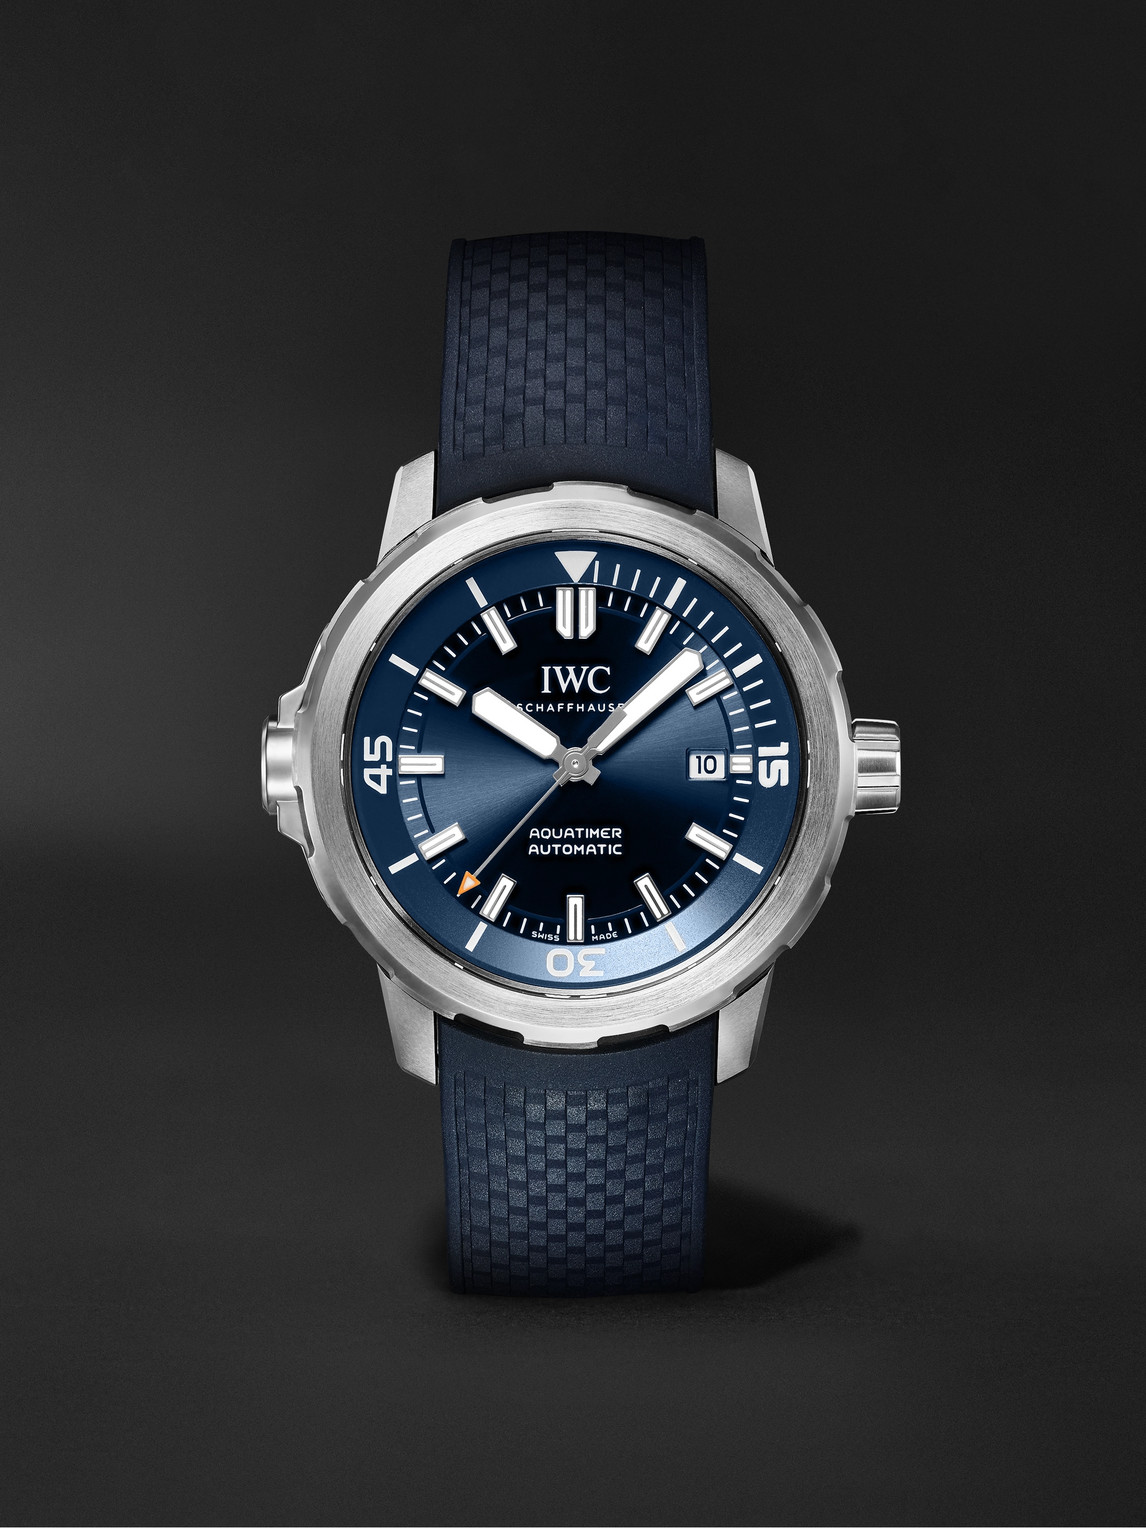 Iwc Schaffhausen Aquatimer Expedition Jacques-yves Cousteau Automatic 42mm Stainless Steel And Rubber Watch, Ref. No. In Blue